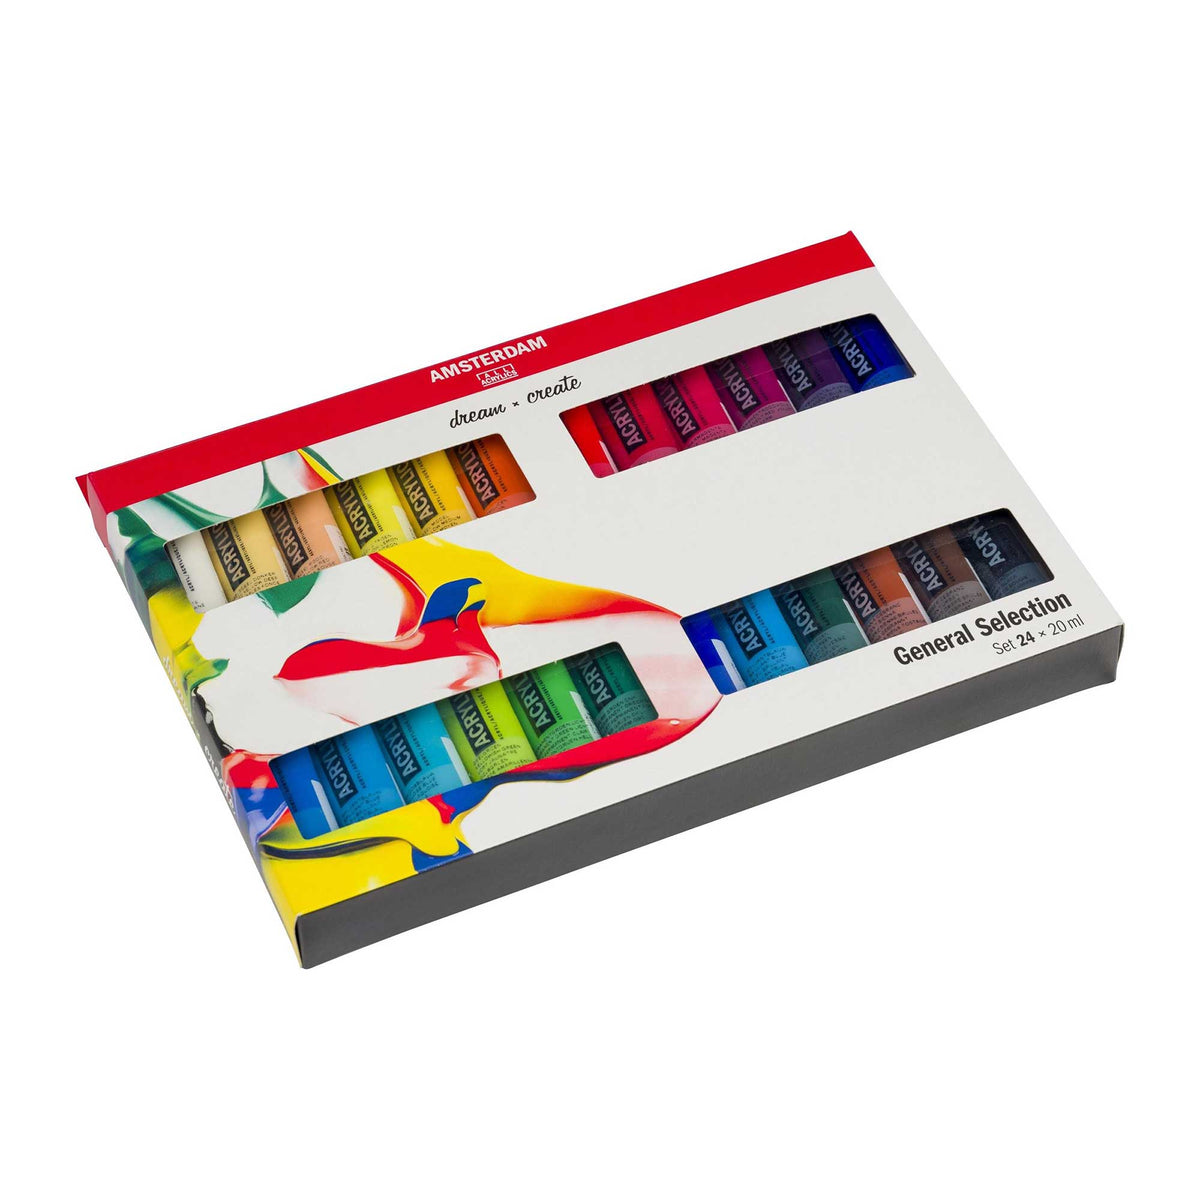 Amsterdam Acrylic Paint General Selection at angle